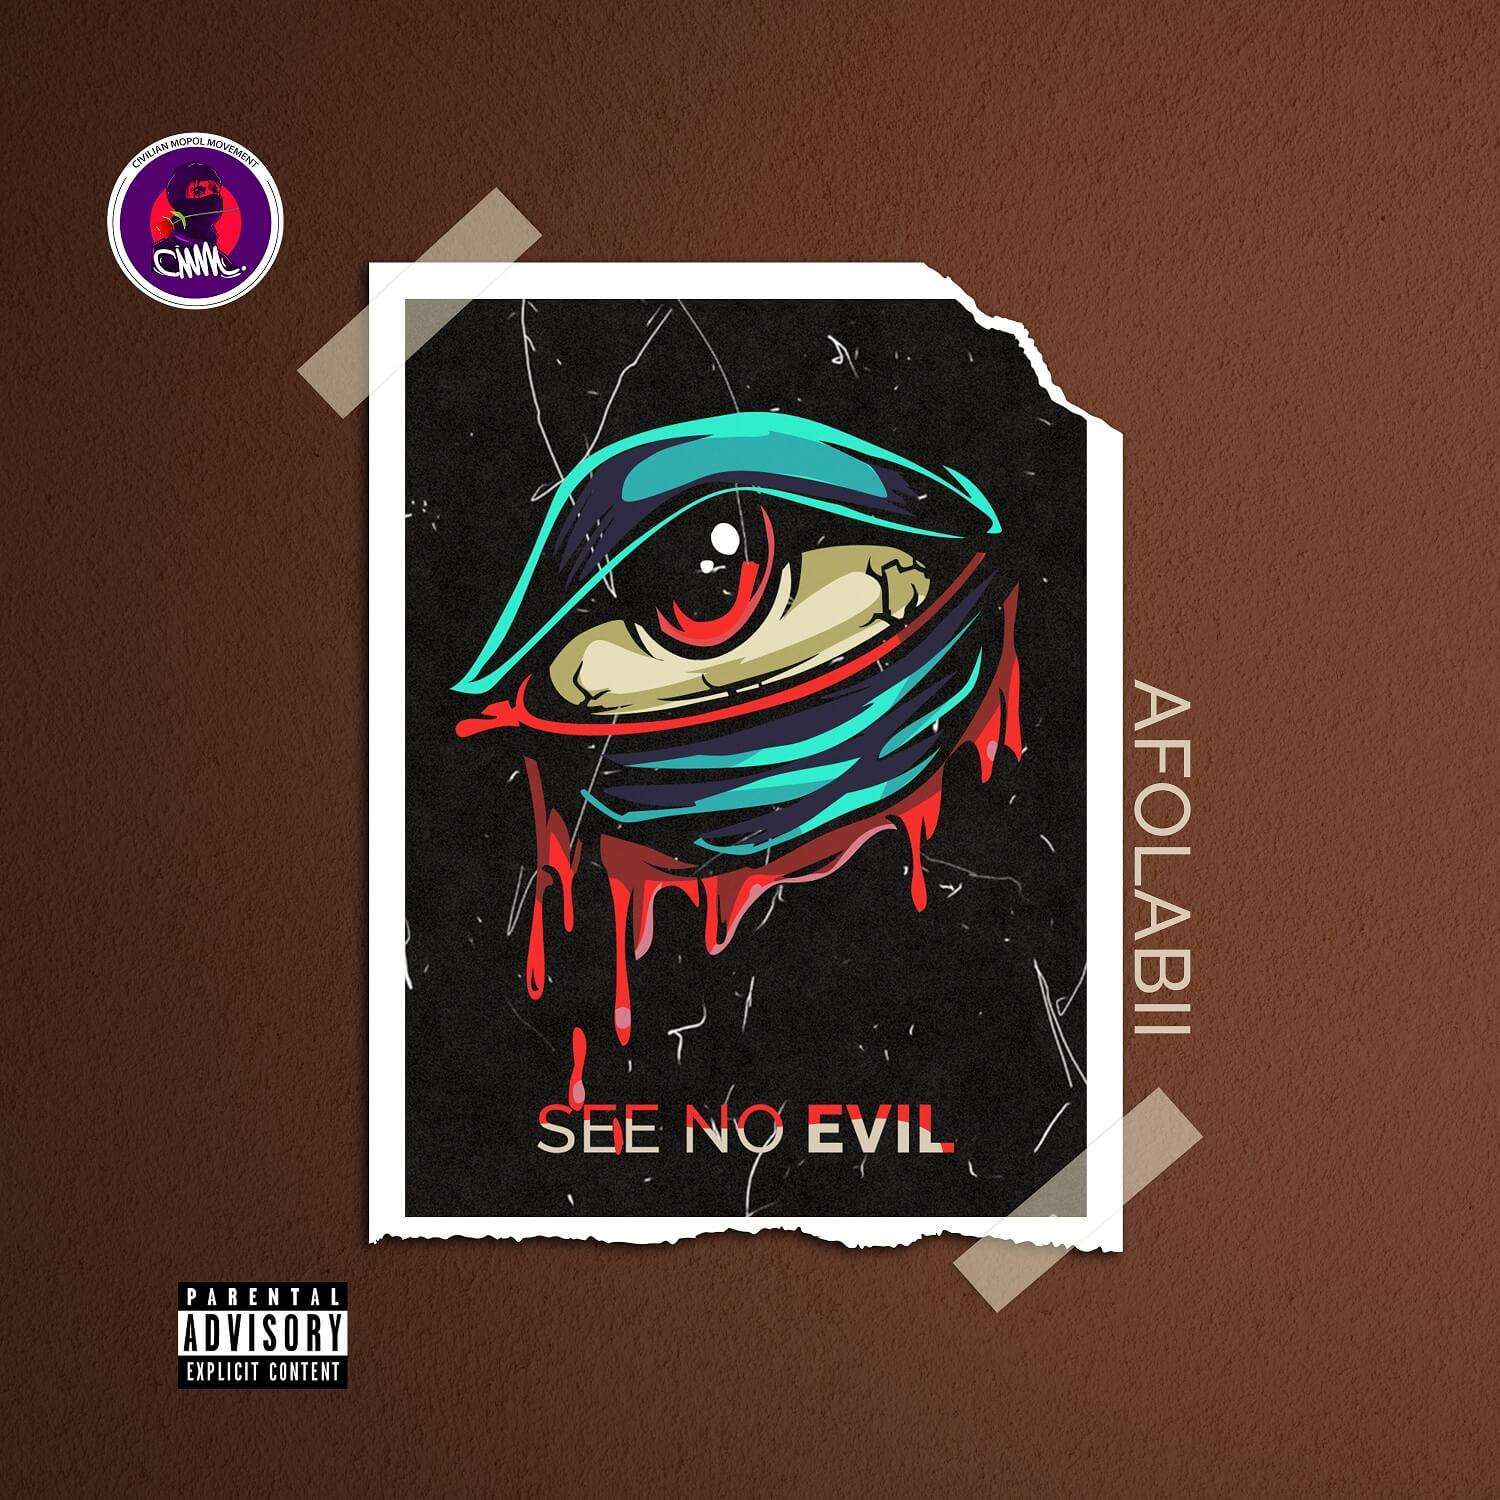 New Music: Afolabii - See No Evil